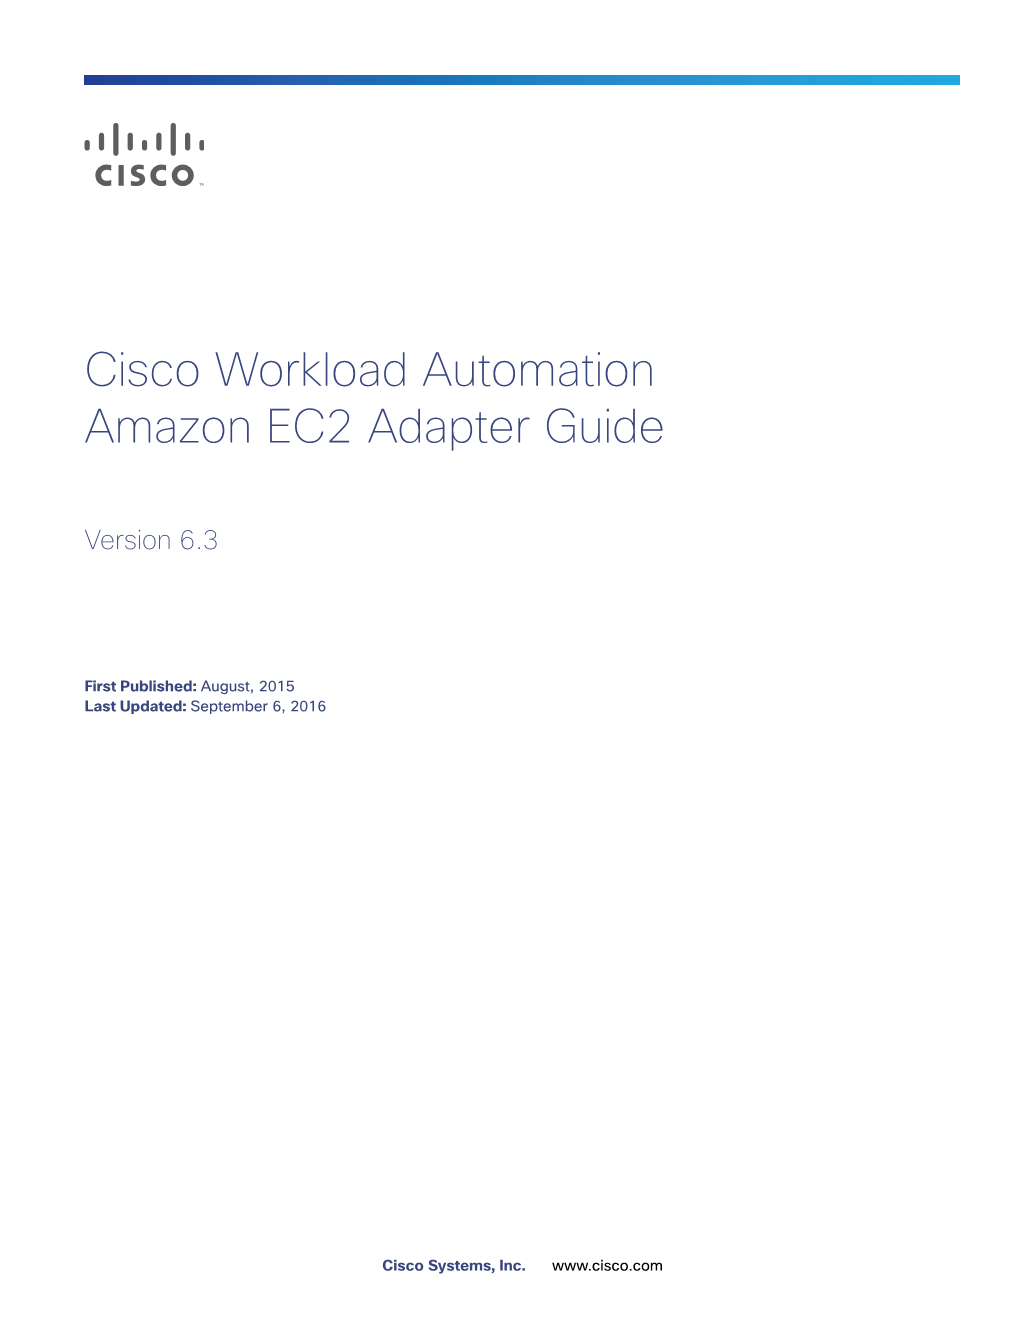 Cisco Workload Automation Amazon EC2 Adapter Guide